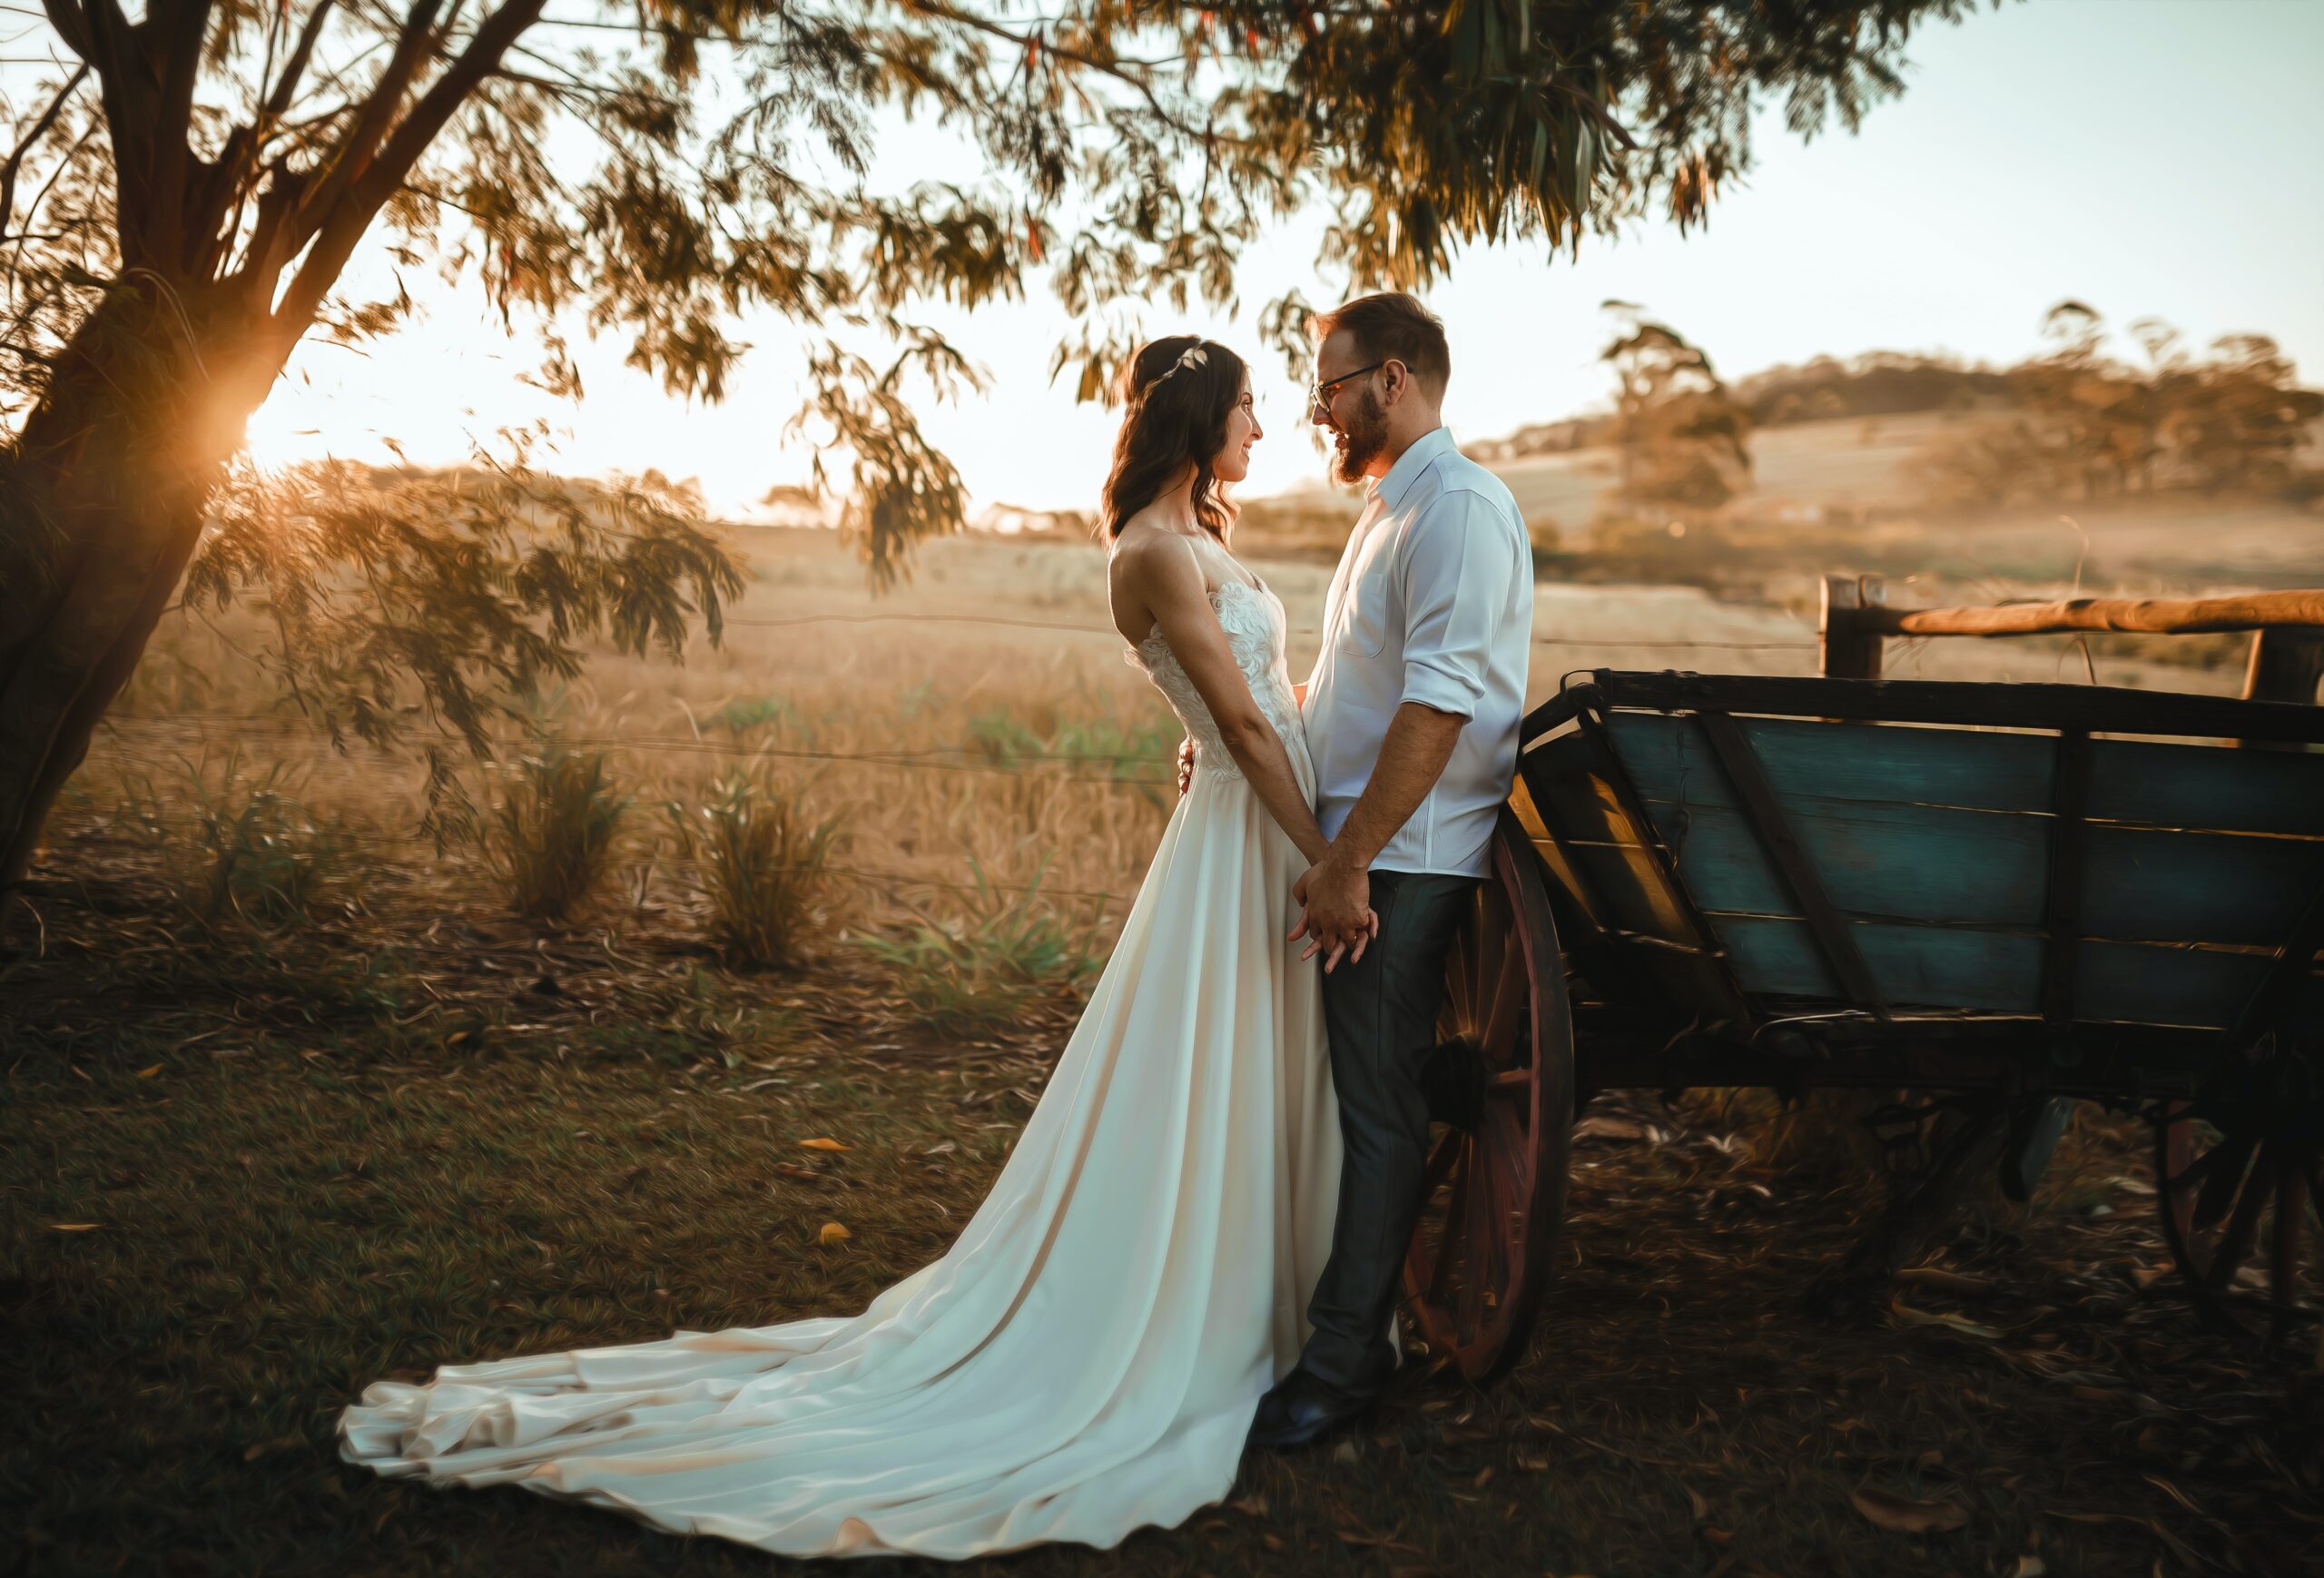 bride and groom in a field